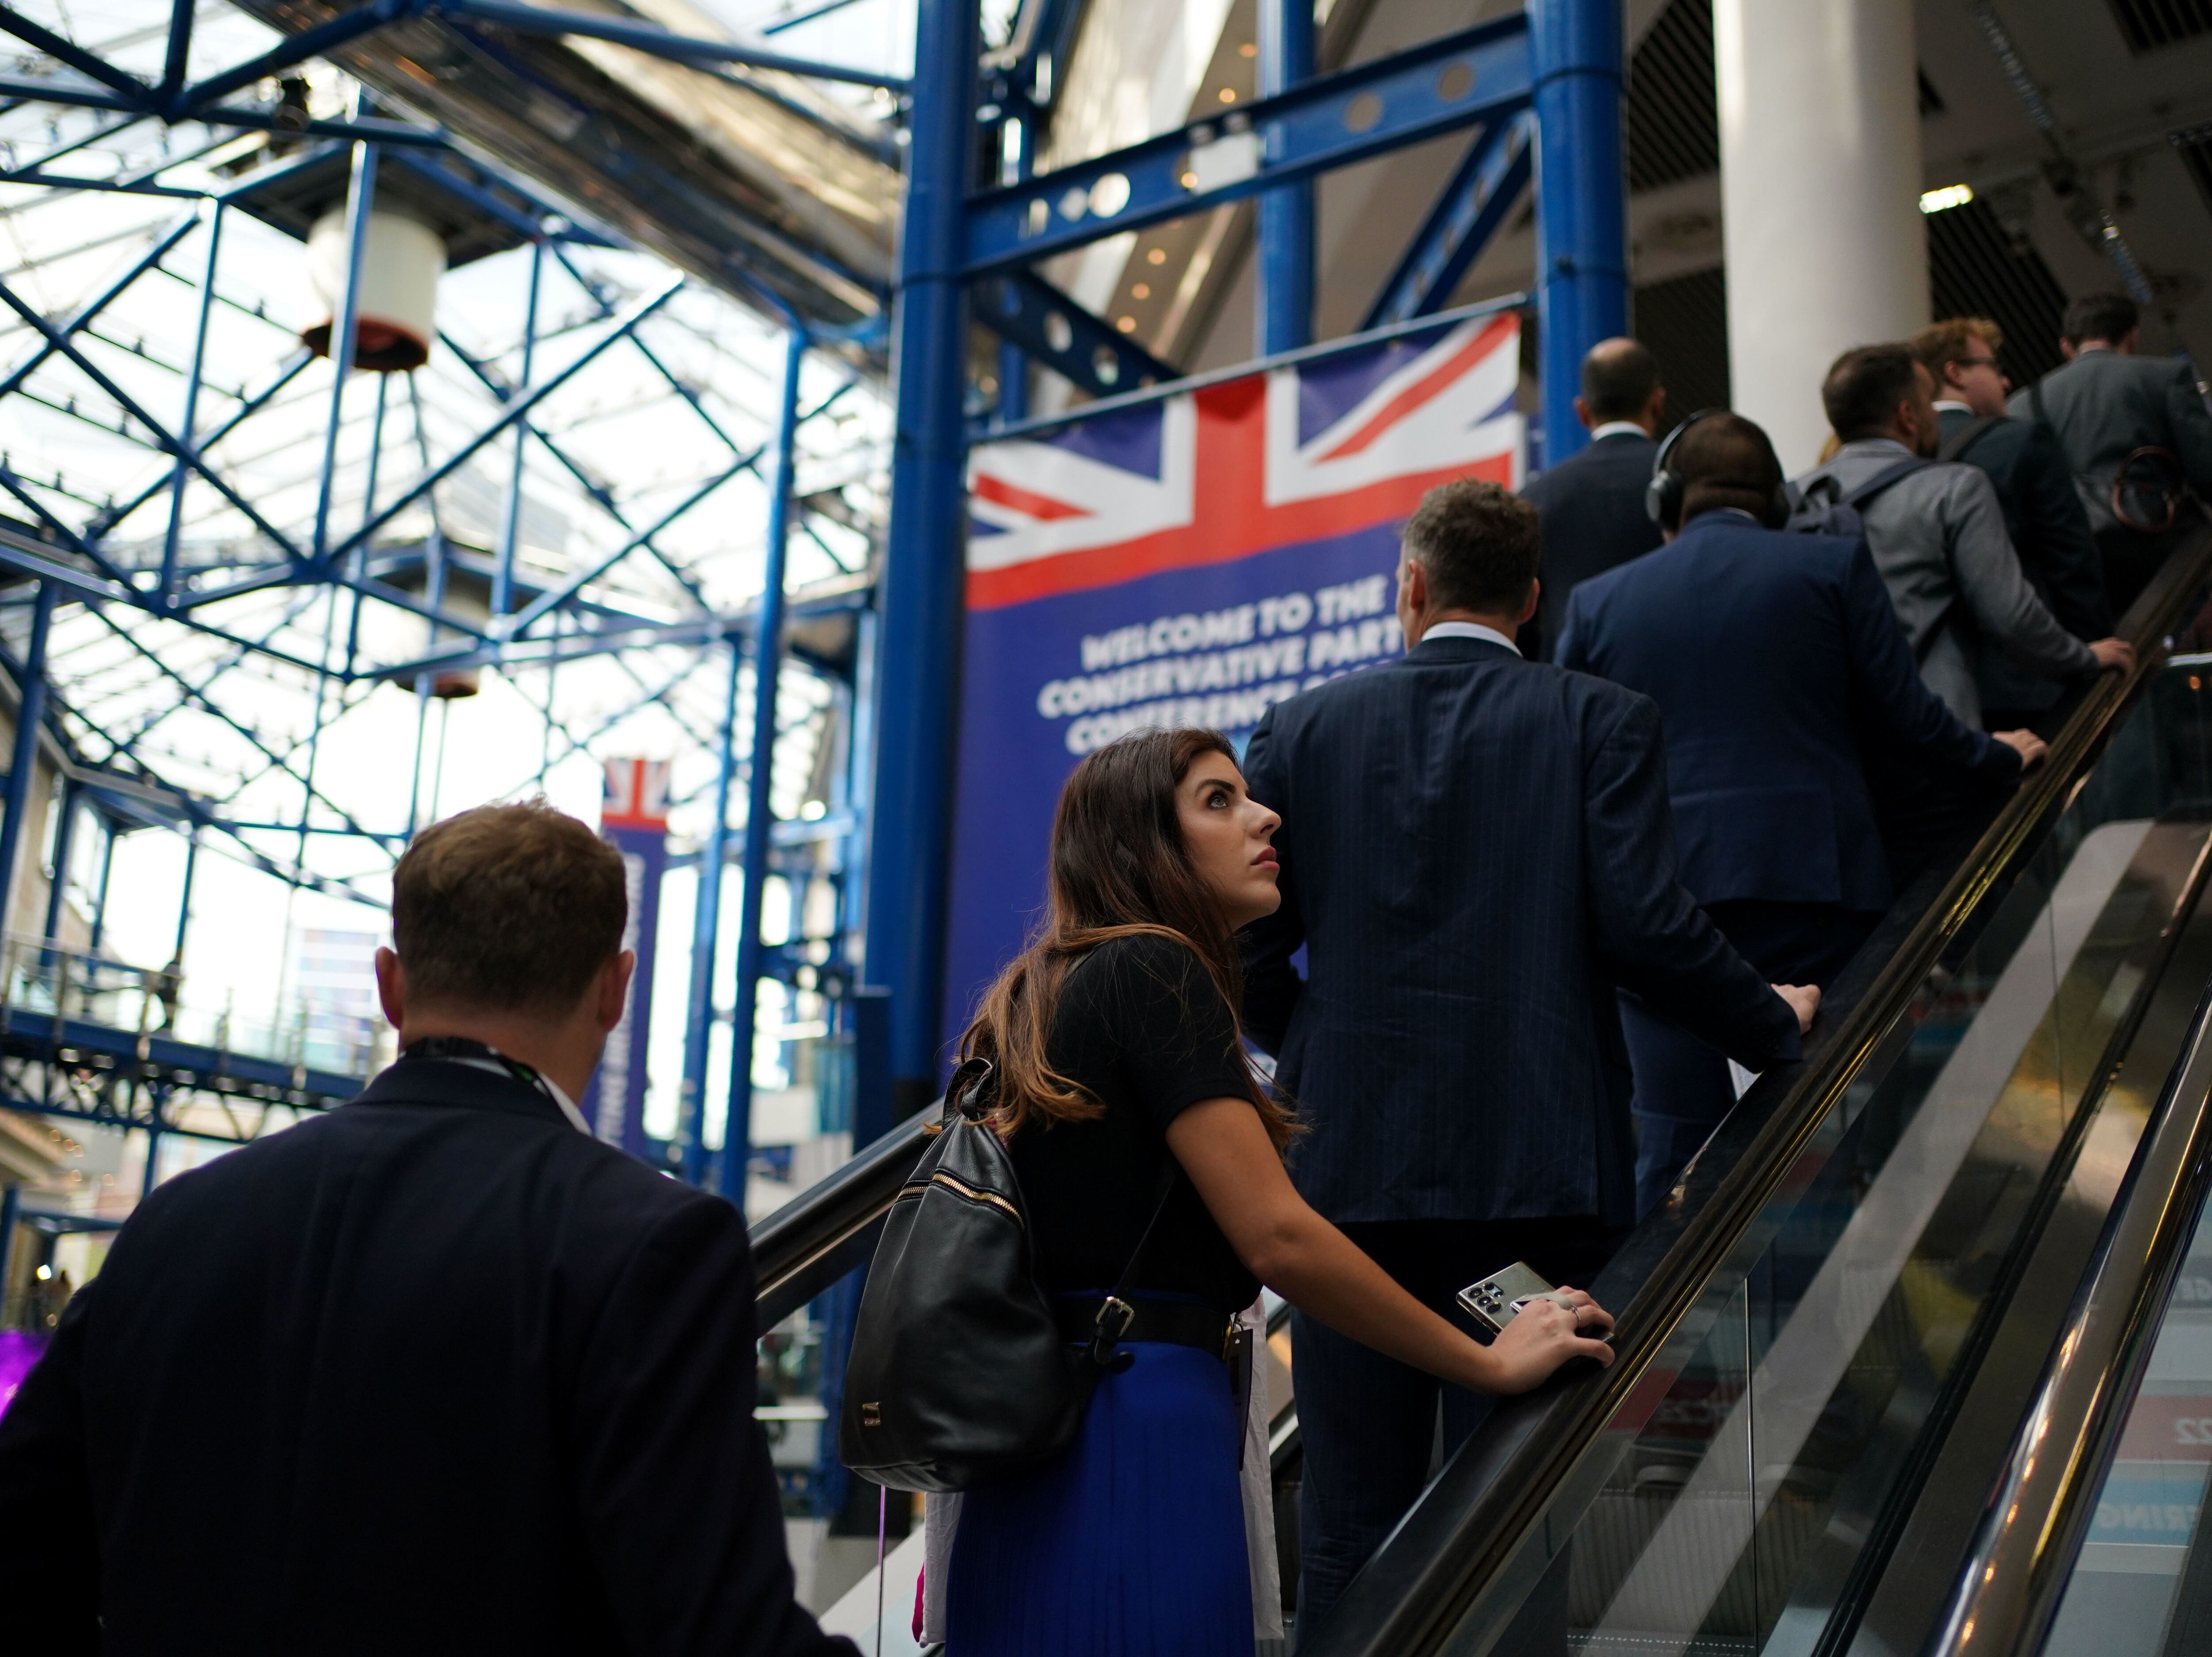 Conservative Party conference locked down over 'potential security alert' 